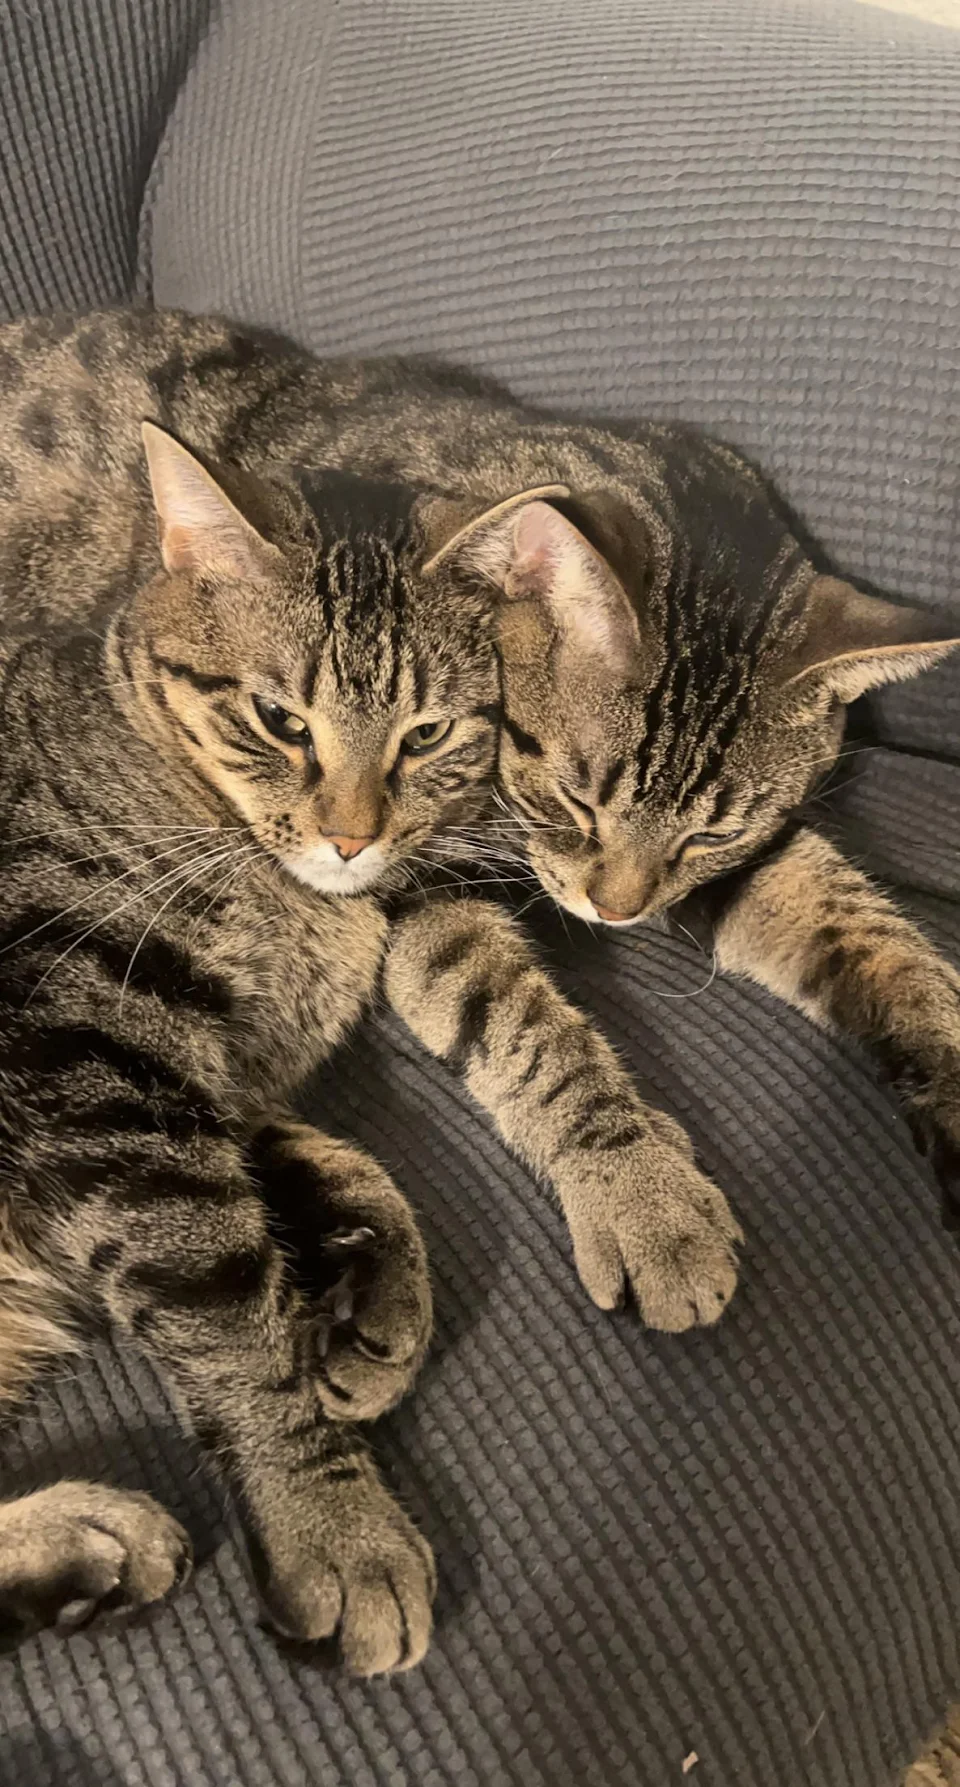 Brothers cuddle up